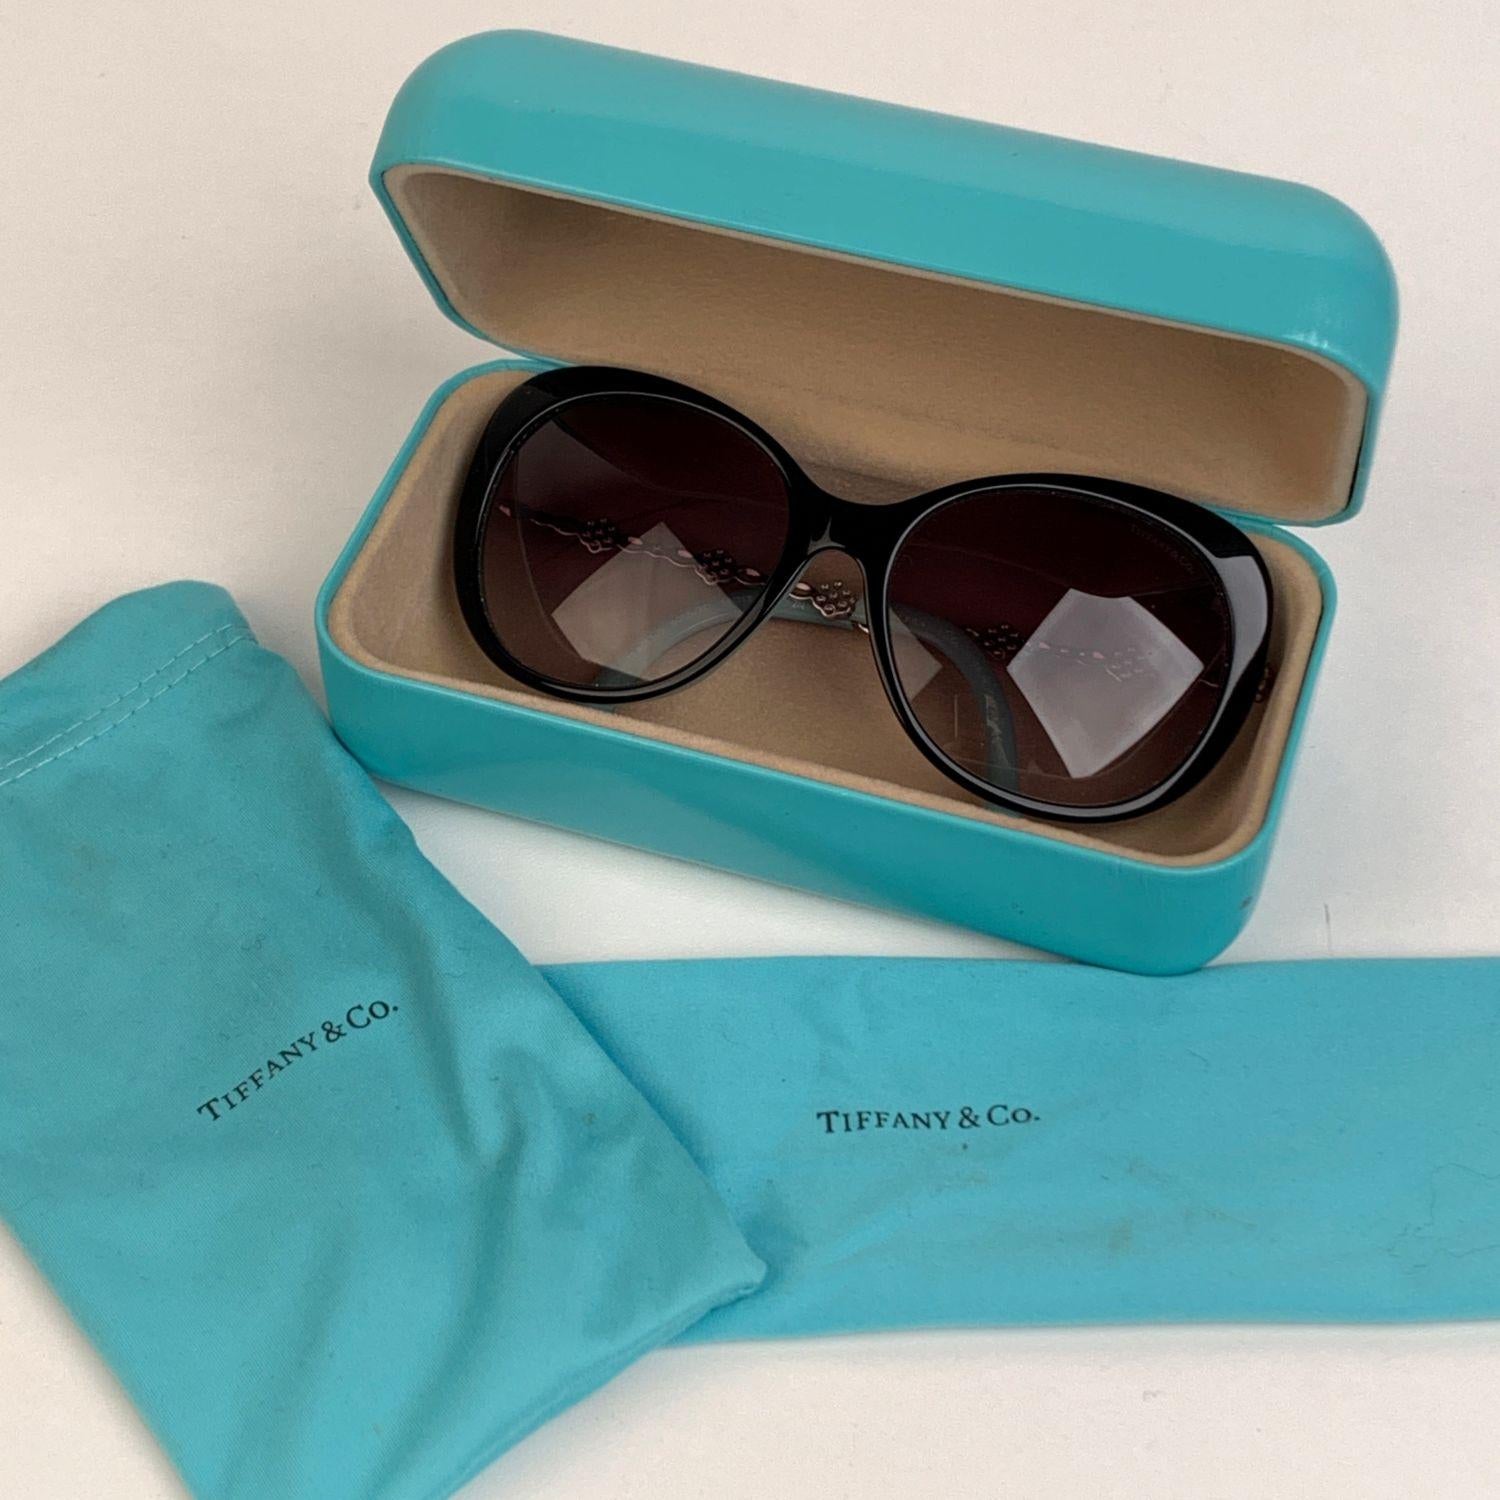 Tiffany & Co. Butterfly Sunglasses, mod. TF 4053-B. Black acetate frame with turquoise interior. Silver metal arms with beautiful crystal flowers. Gradient gray lenses. 100% UV protection. Frame Made in Italy. Mod & refs: TF 4053-B - 8055/3C - 56/17